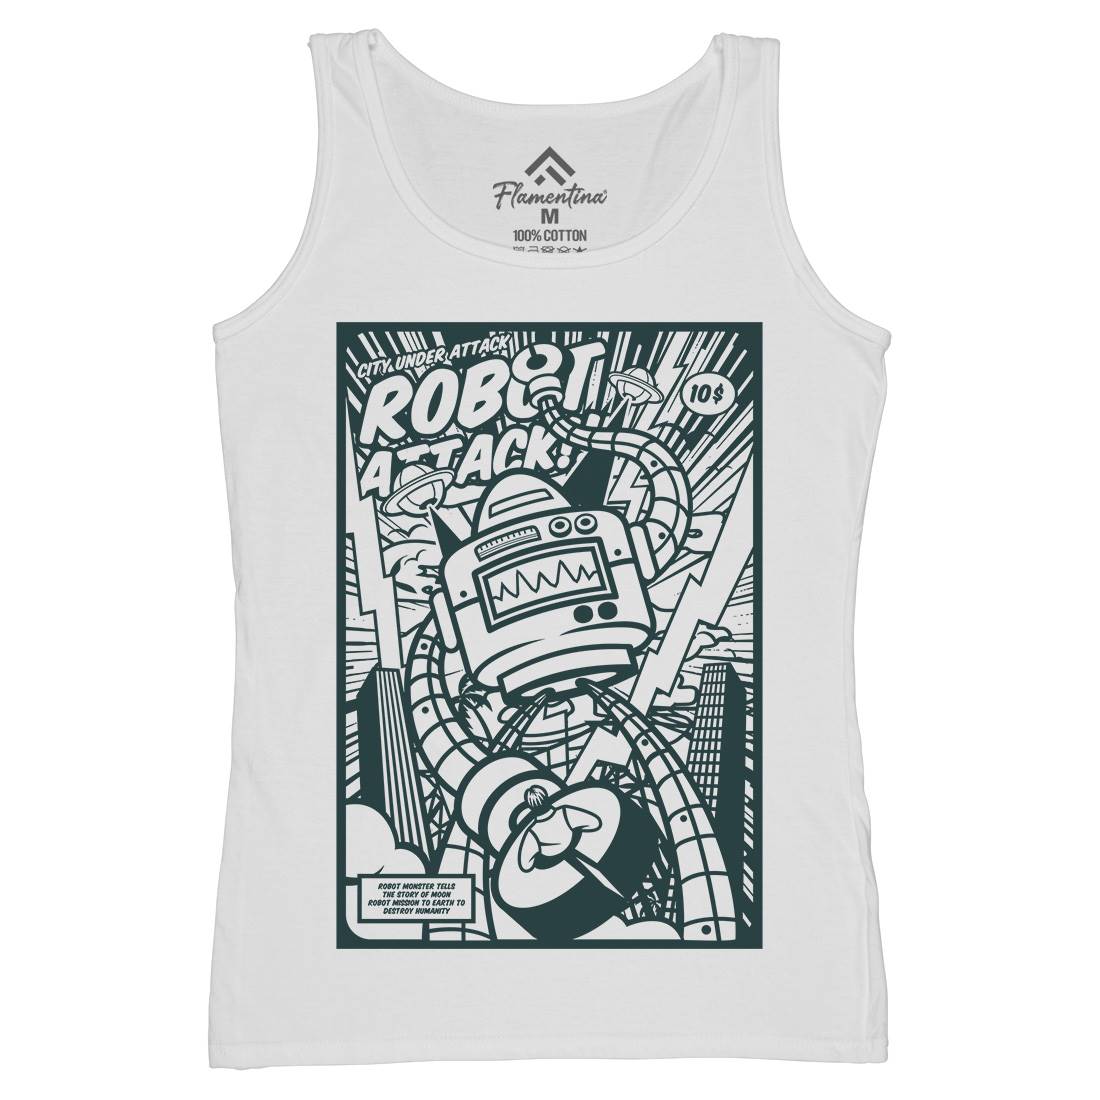 Robot Attack Womens Organic Tank Top Vest Space A271